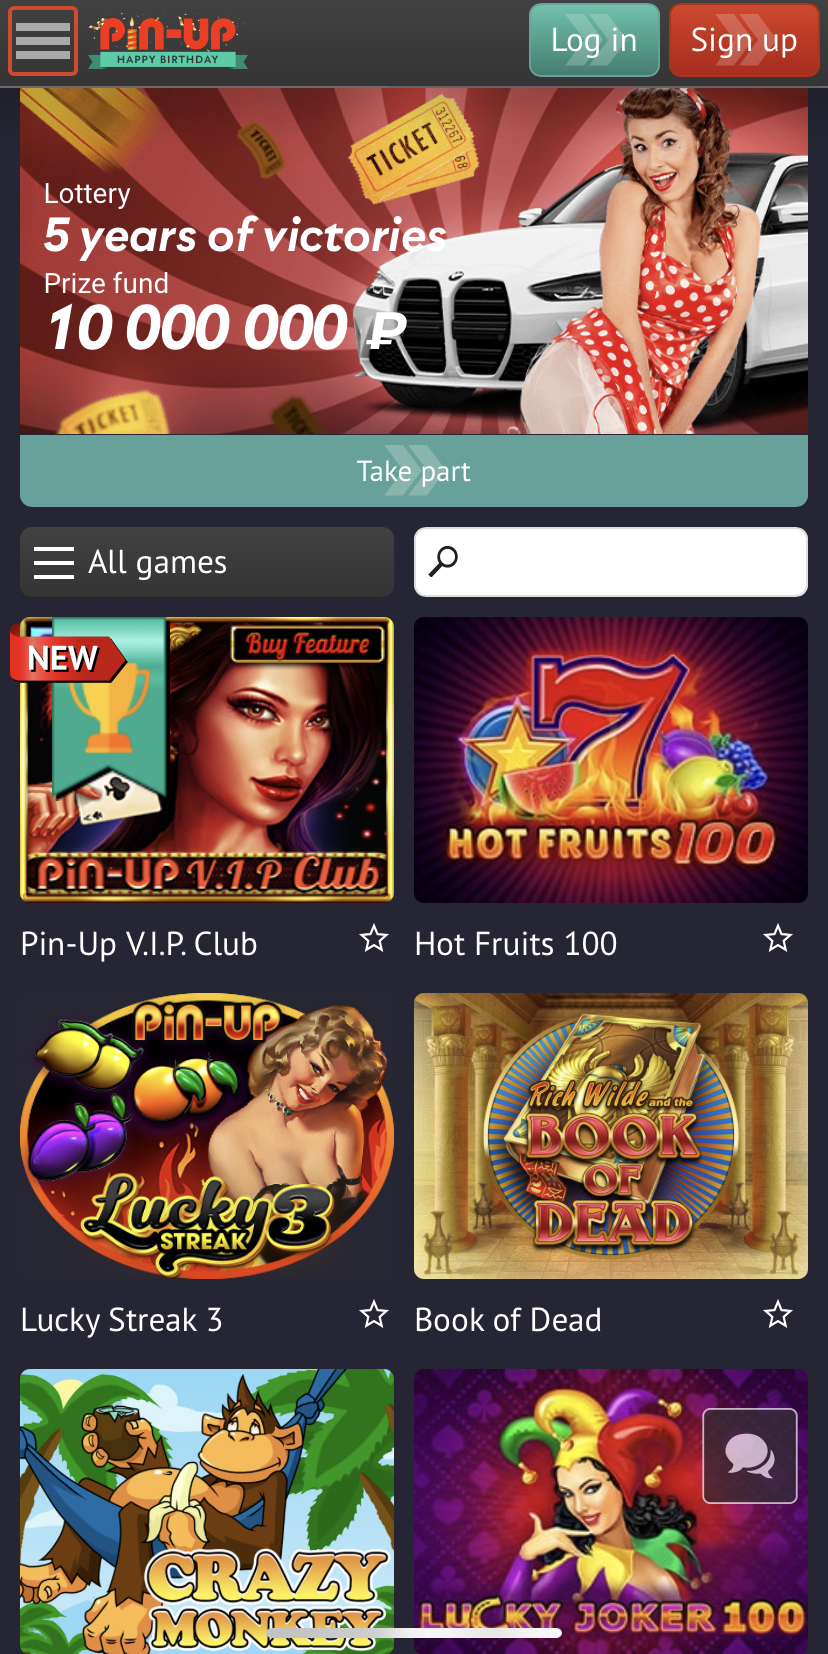 Pin Up Casino Mobile